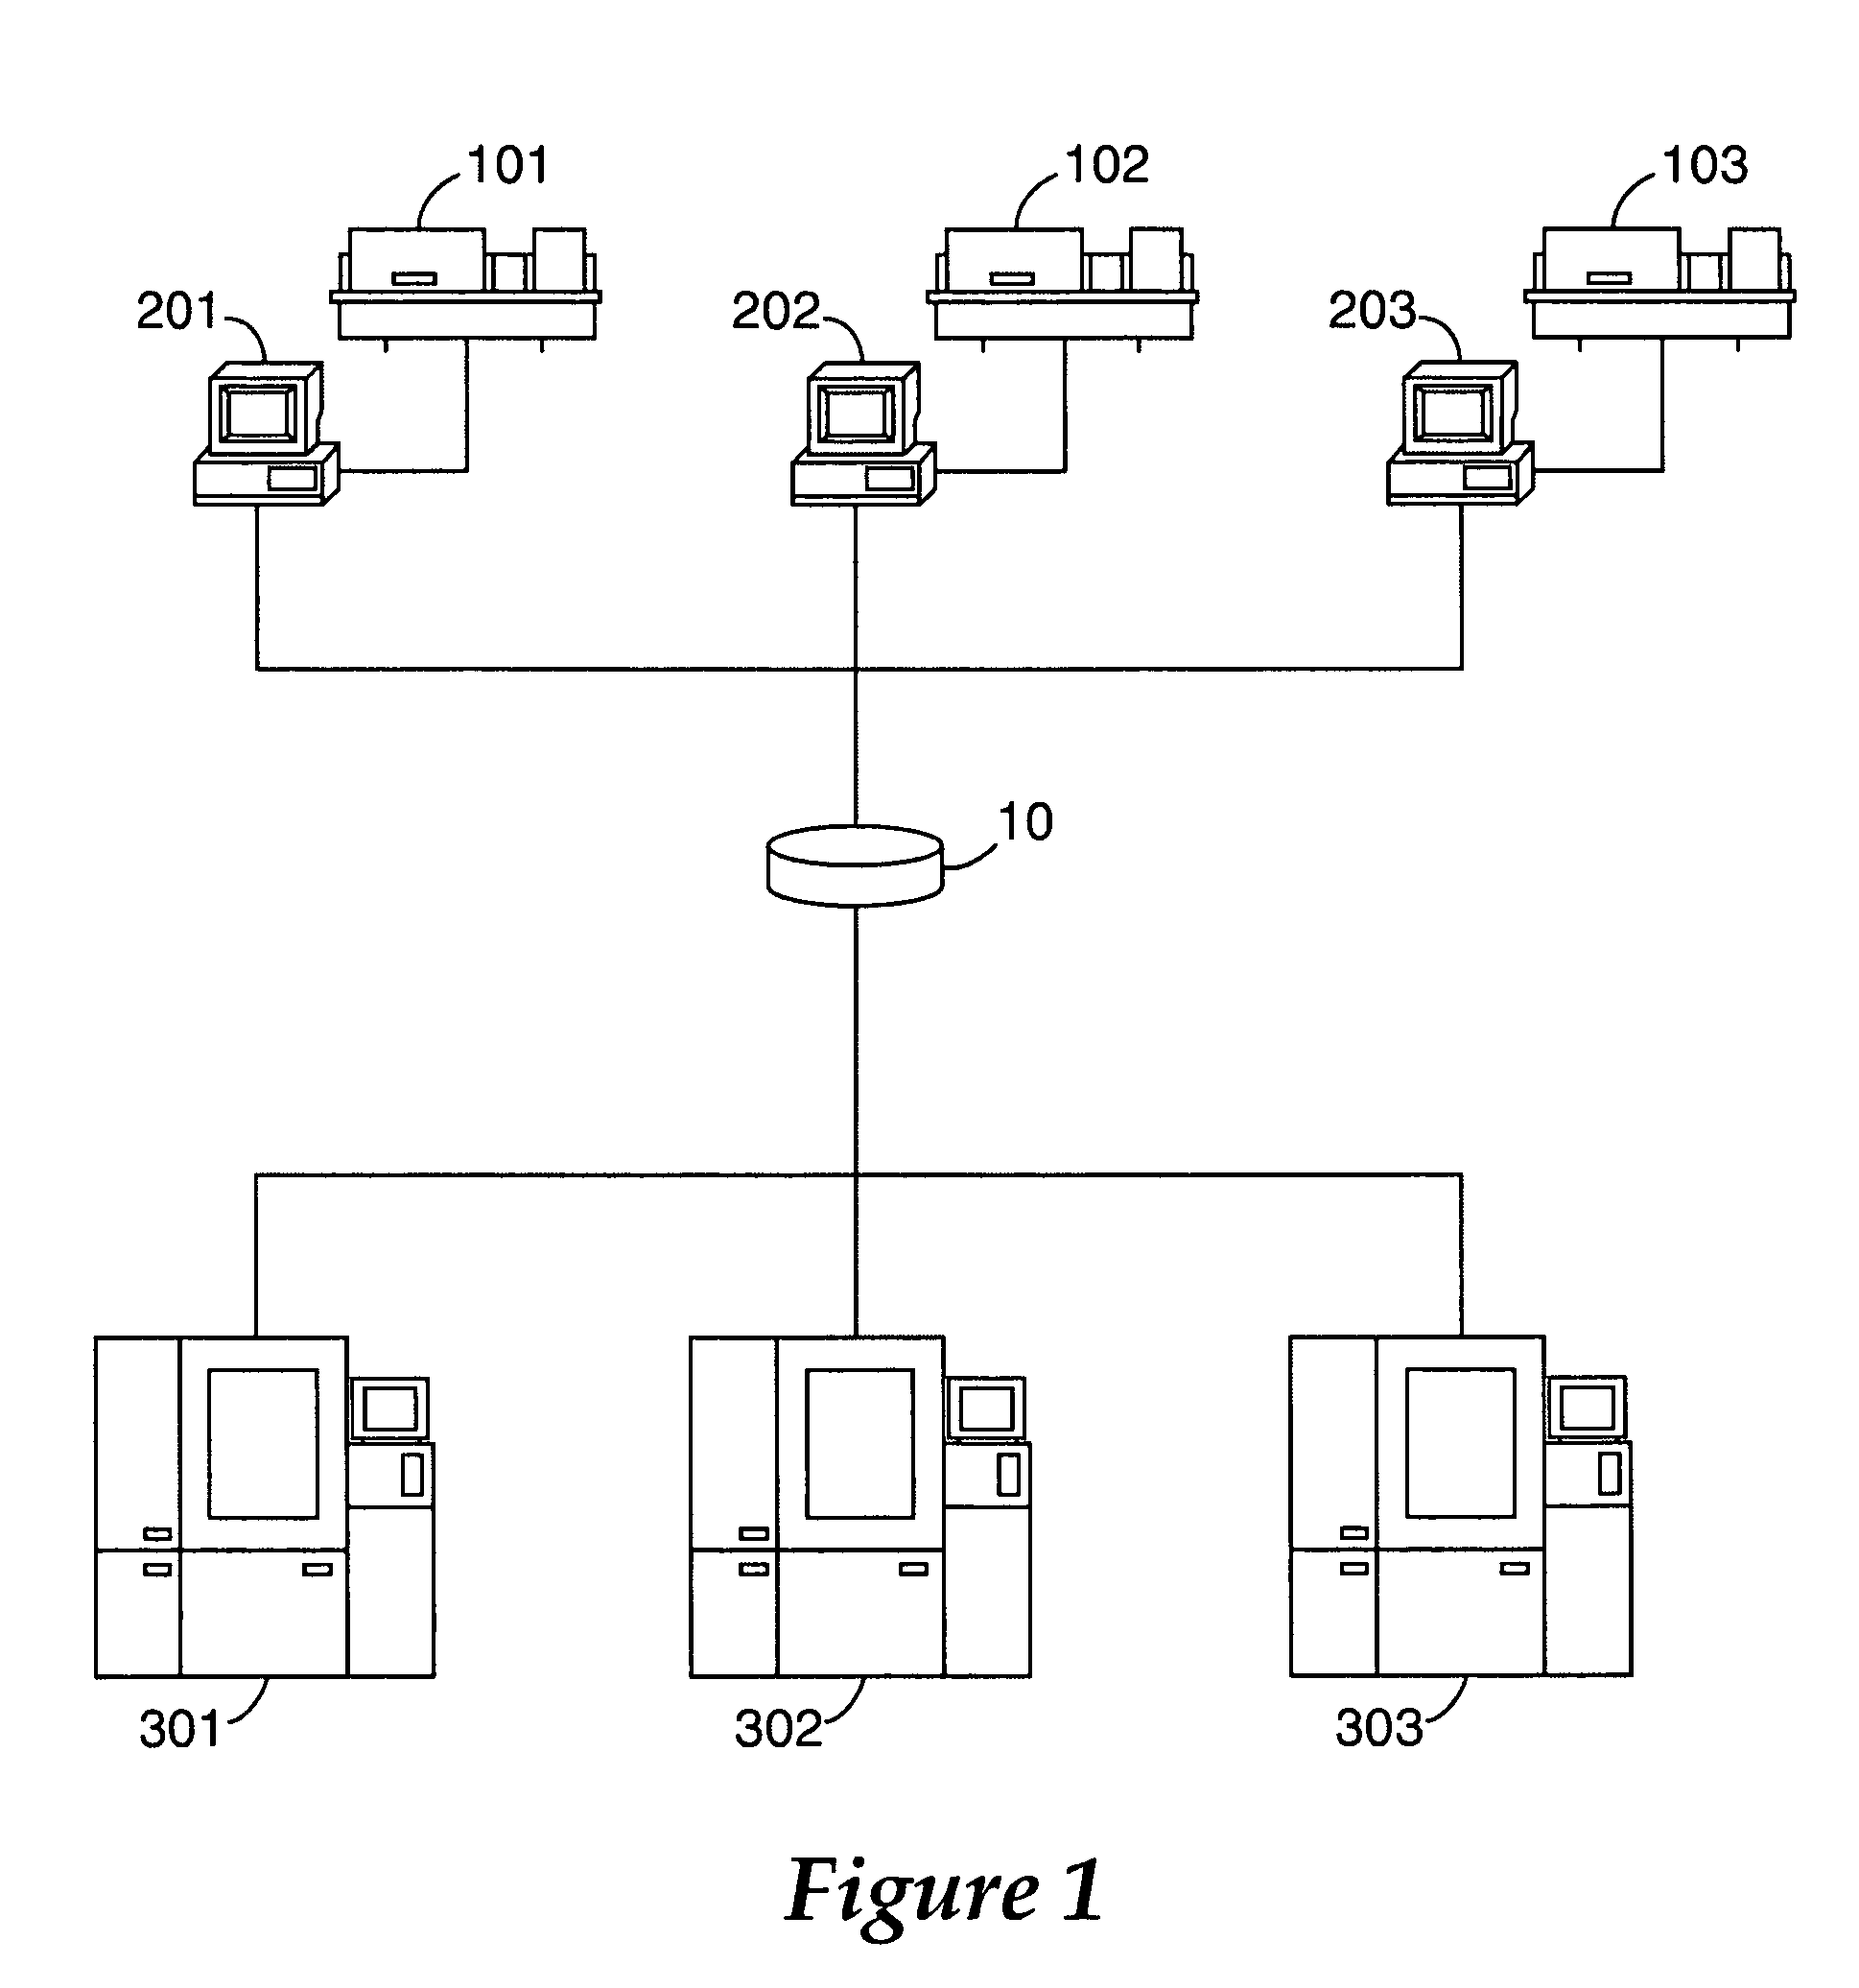 System and method for manufacturing dental prostheses